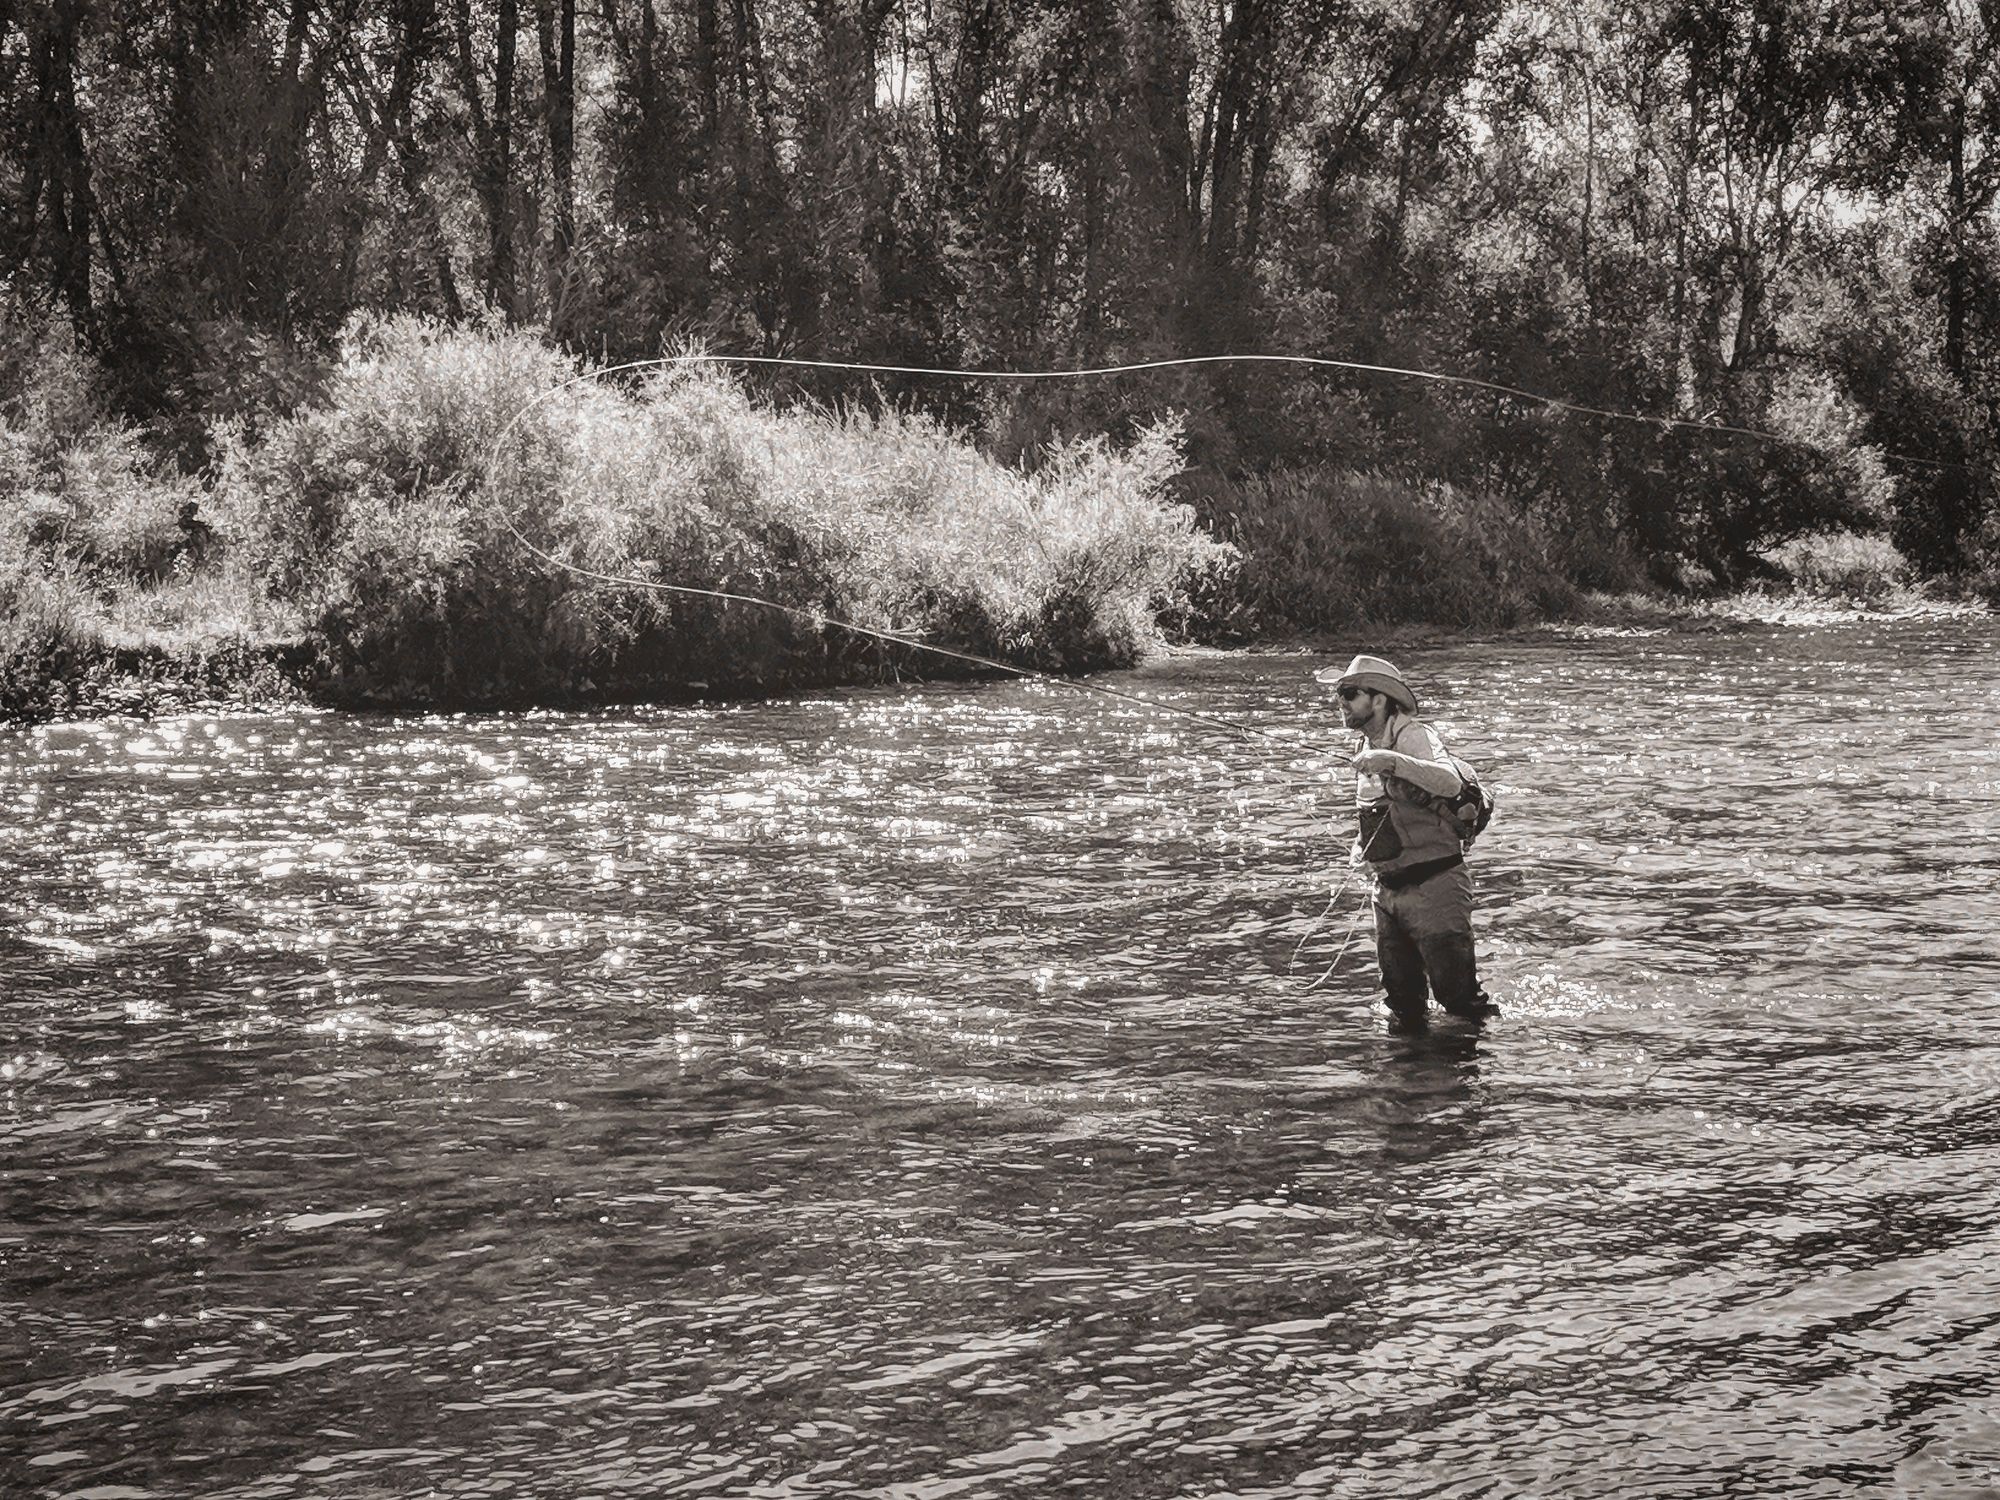 casting a fly rod on the Gunnison River, Colorado